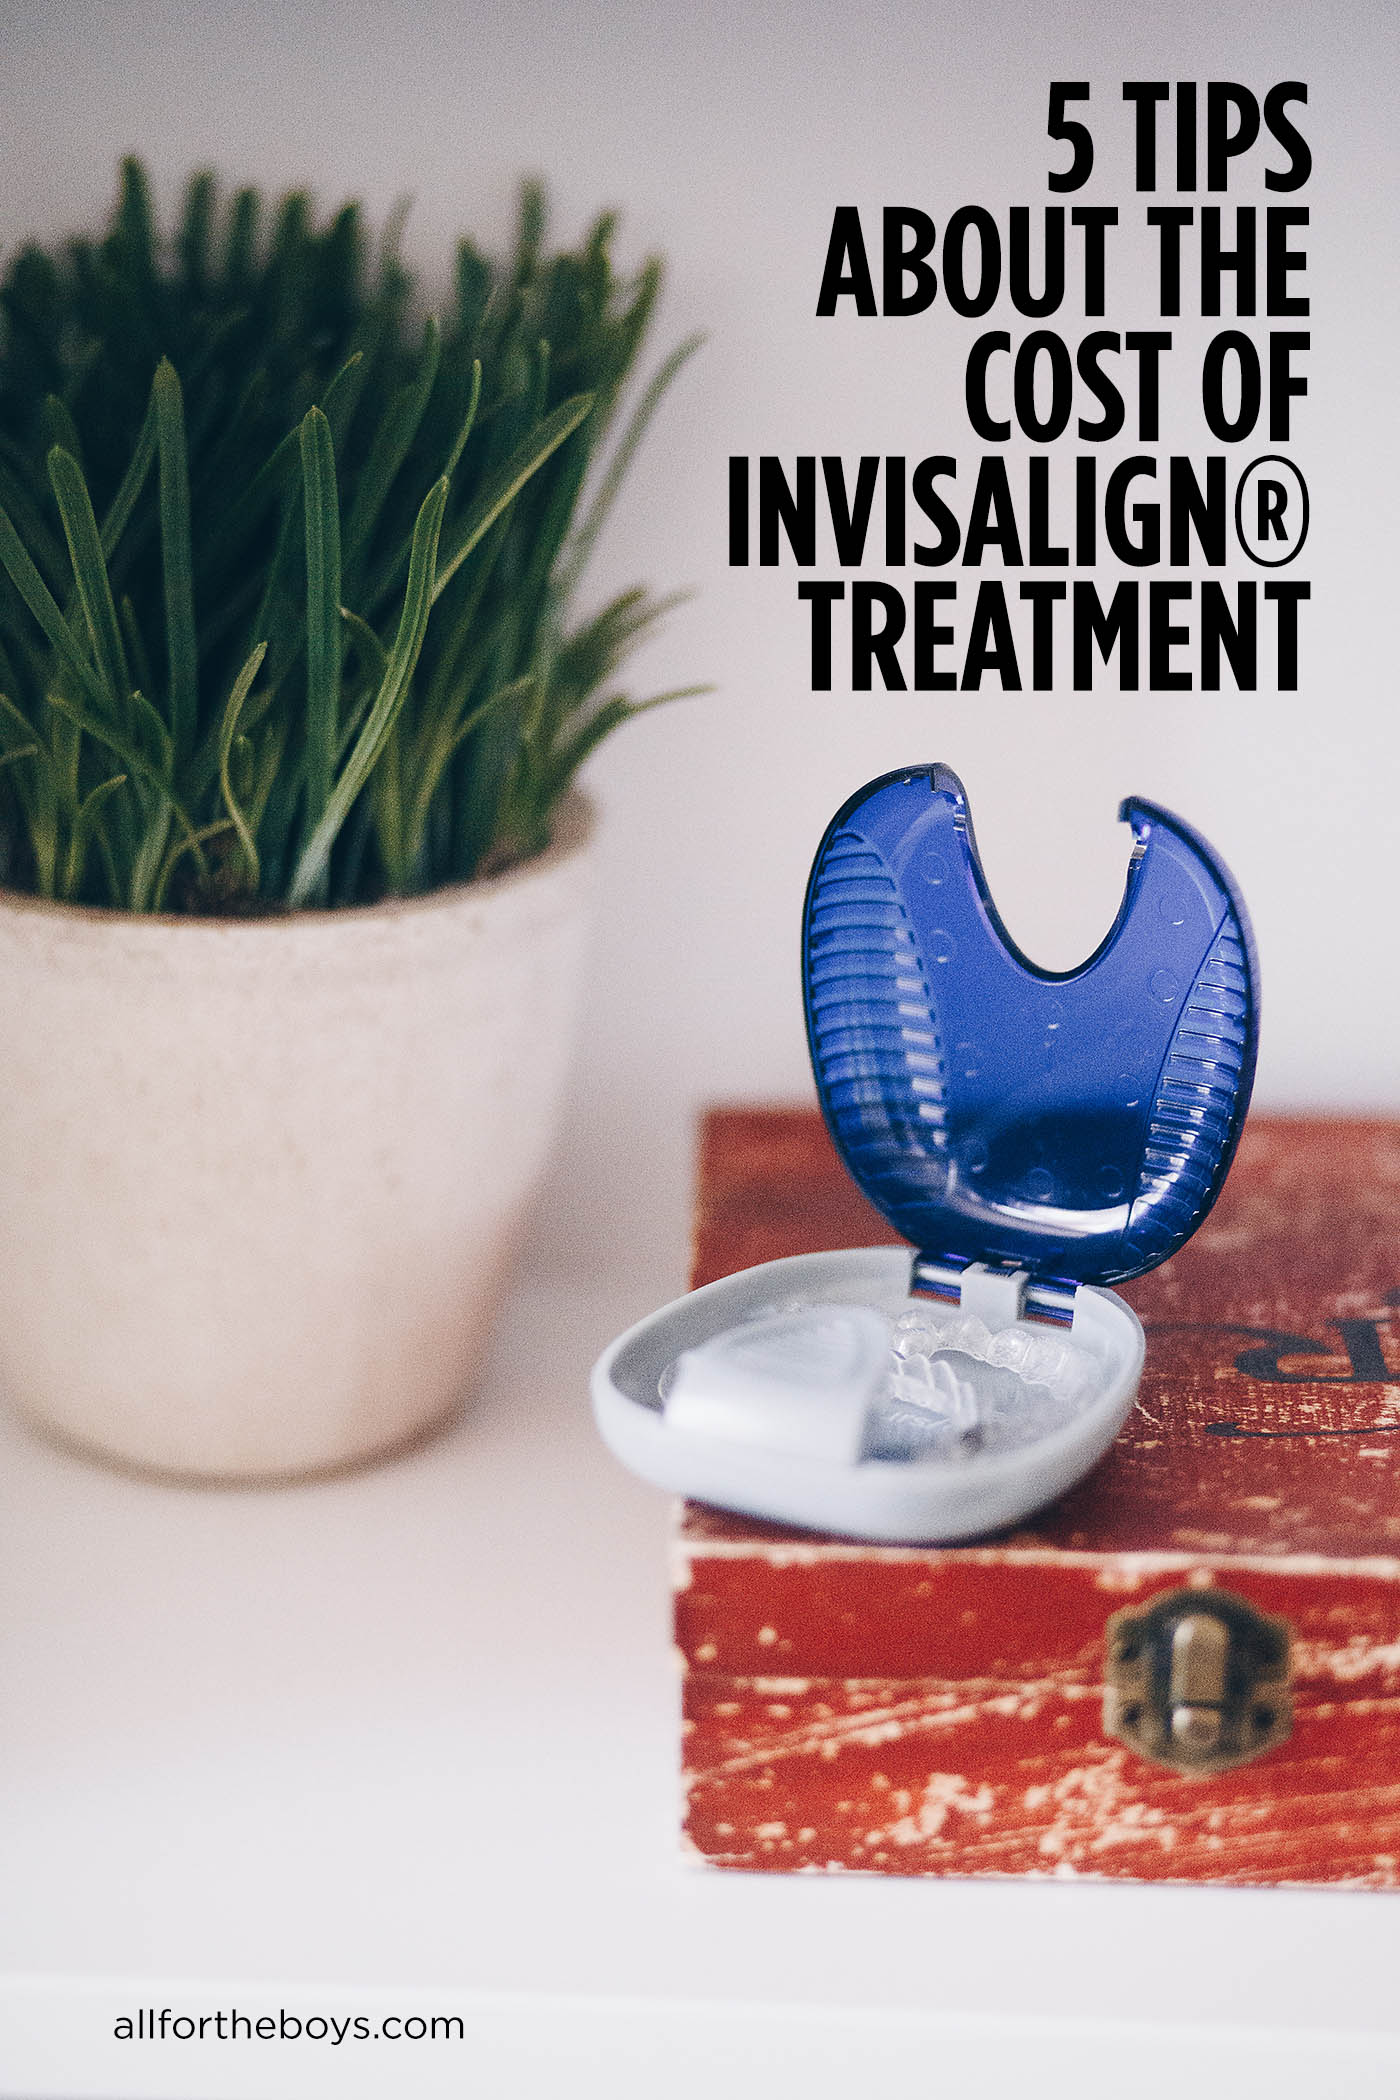 5 tips about the cost of Invisalign® Treatment